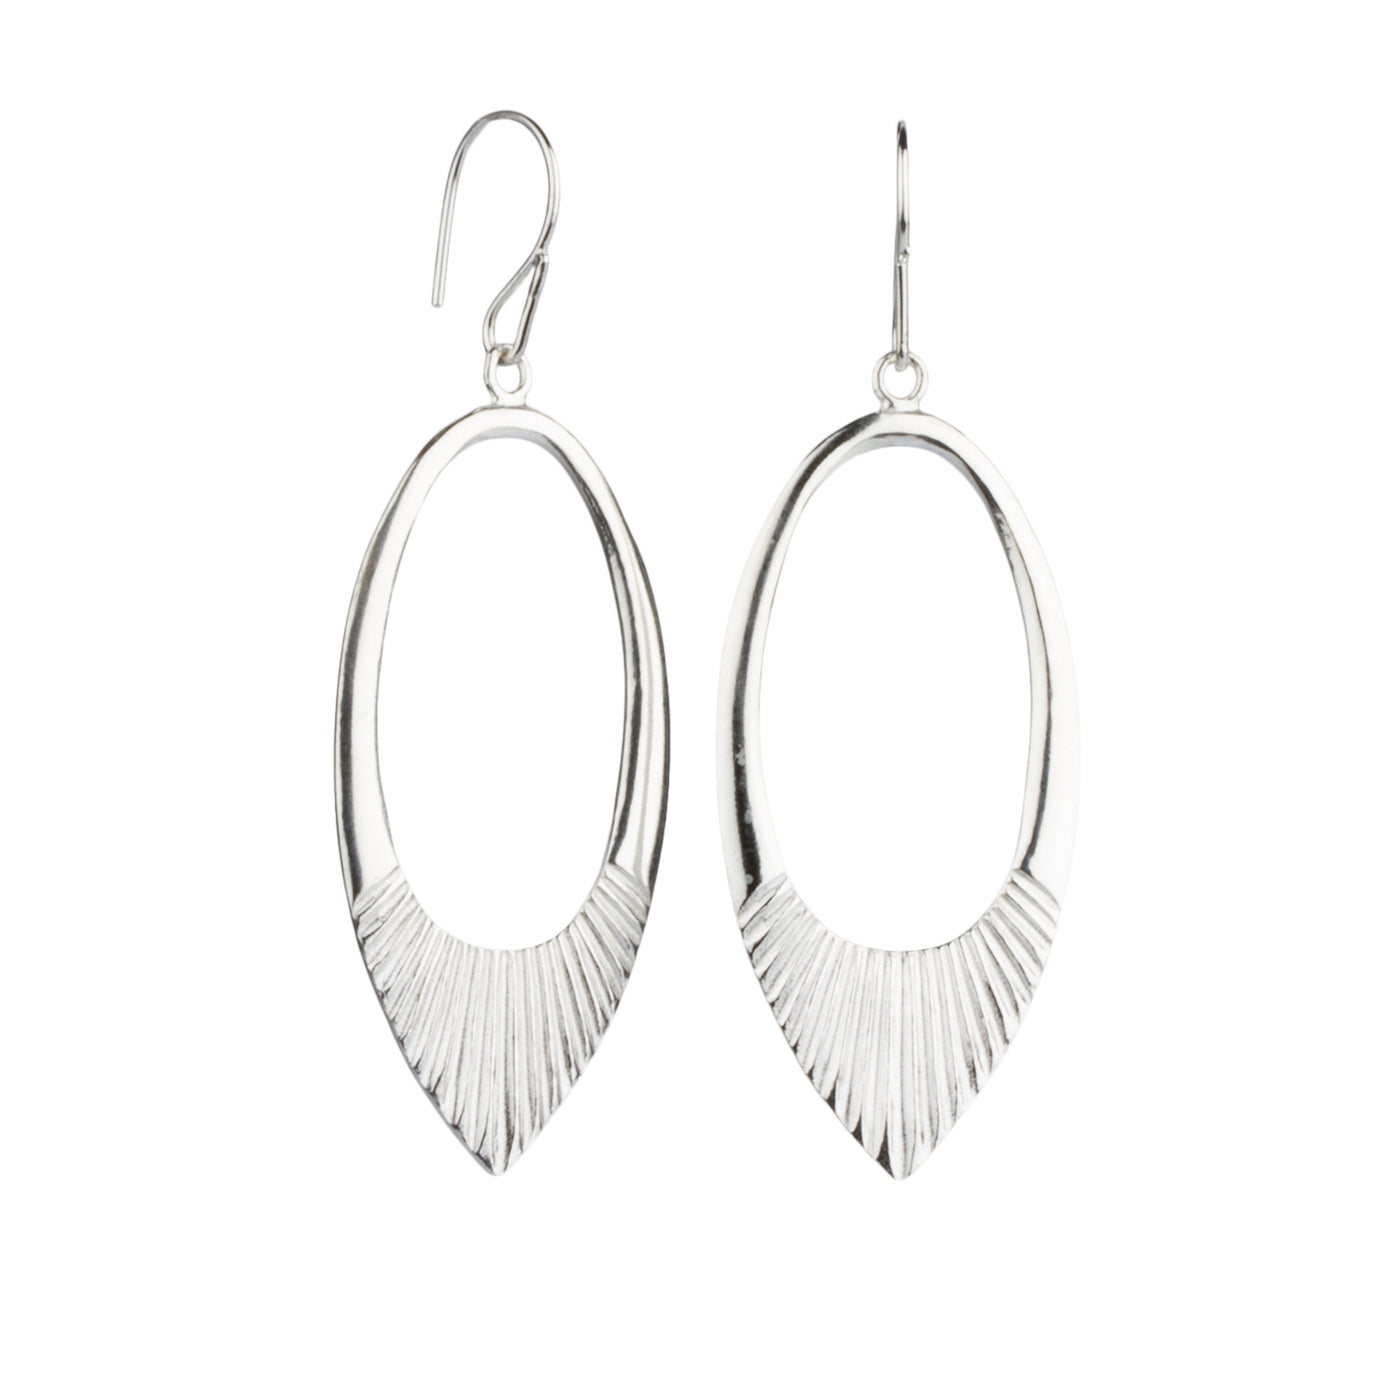 Silver large open petal shape earrings with textured bottoms